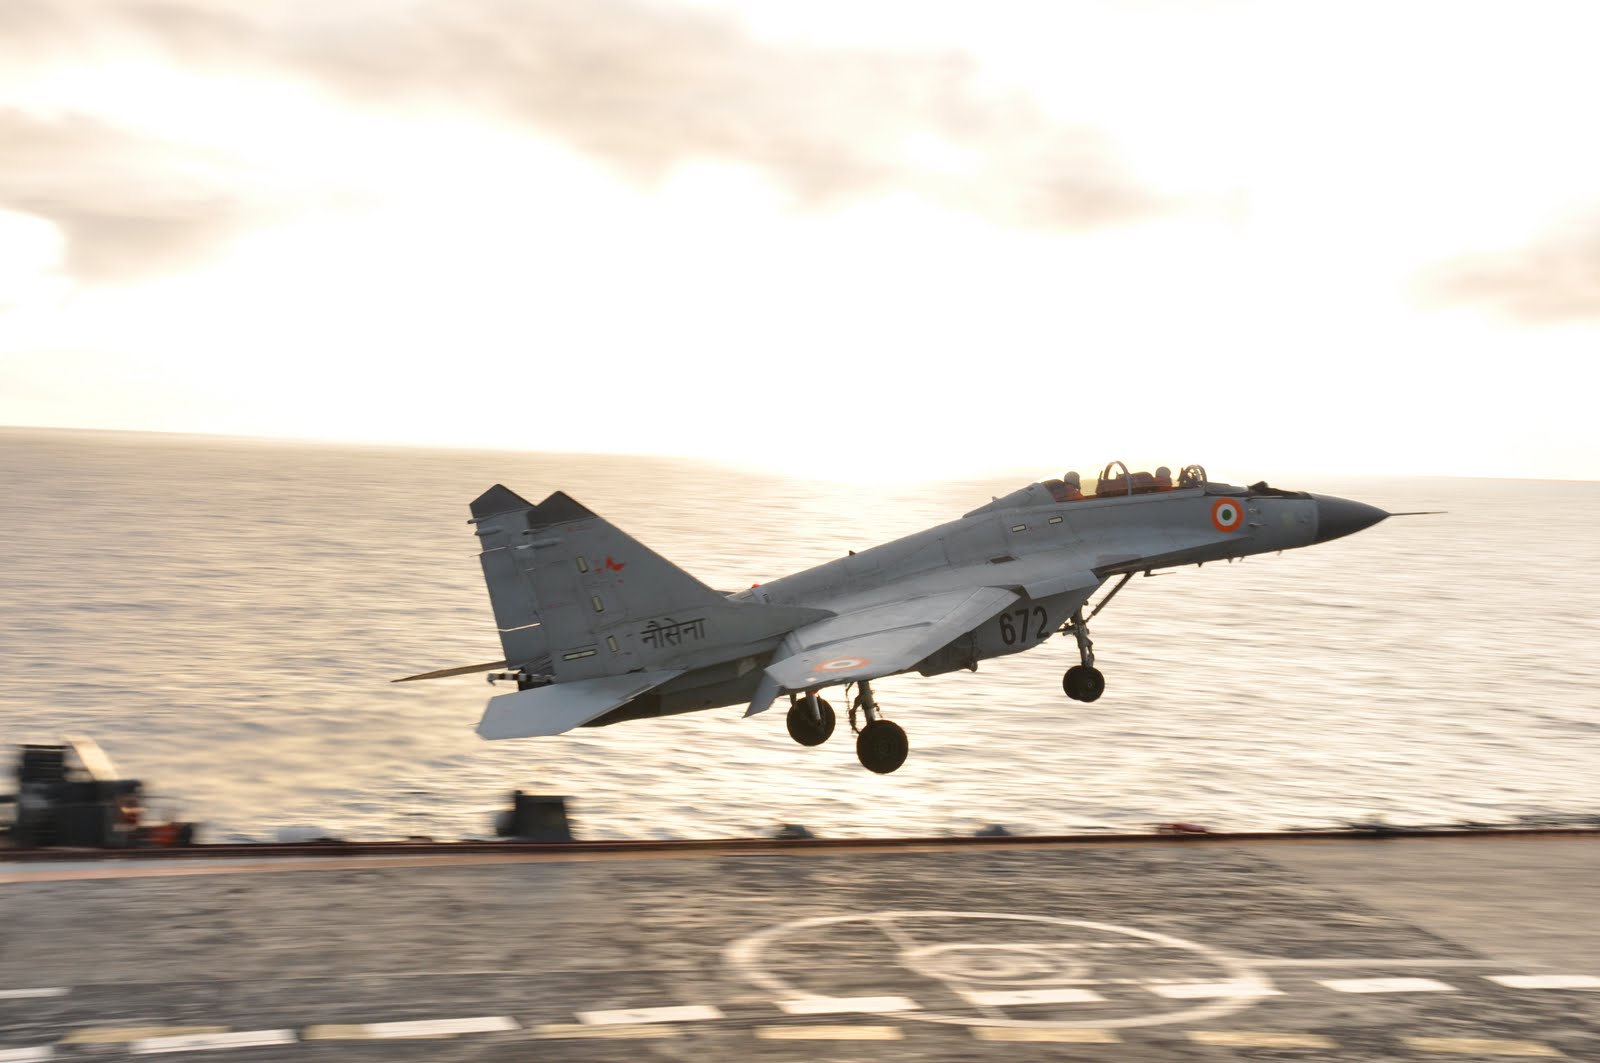 Indian_Navy_Mig-29K-practising_to_land_at_Russian_Navy_Carrier_deck.